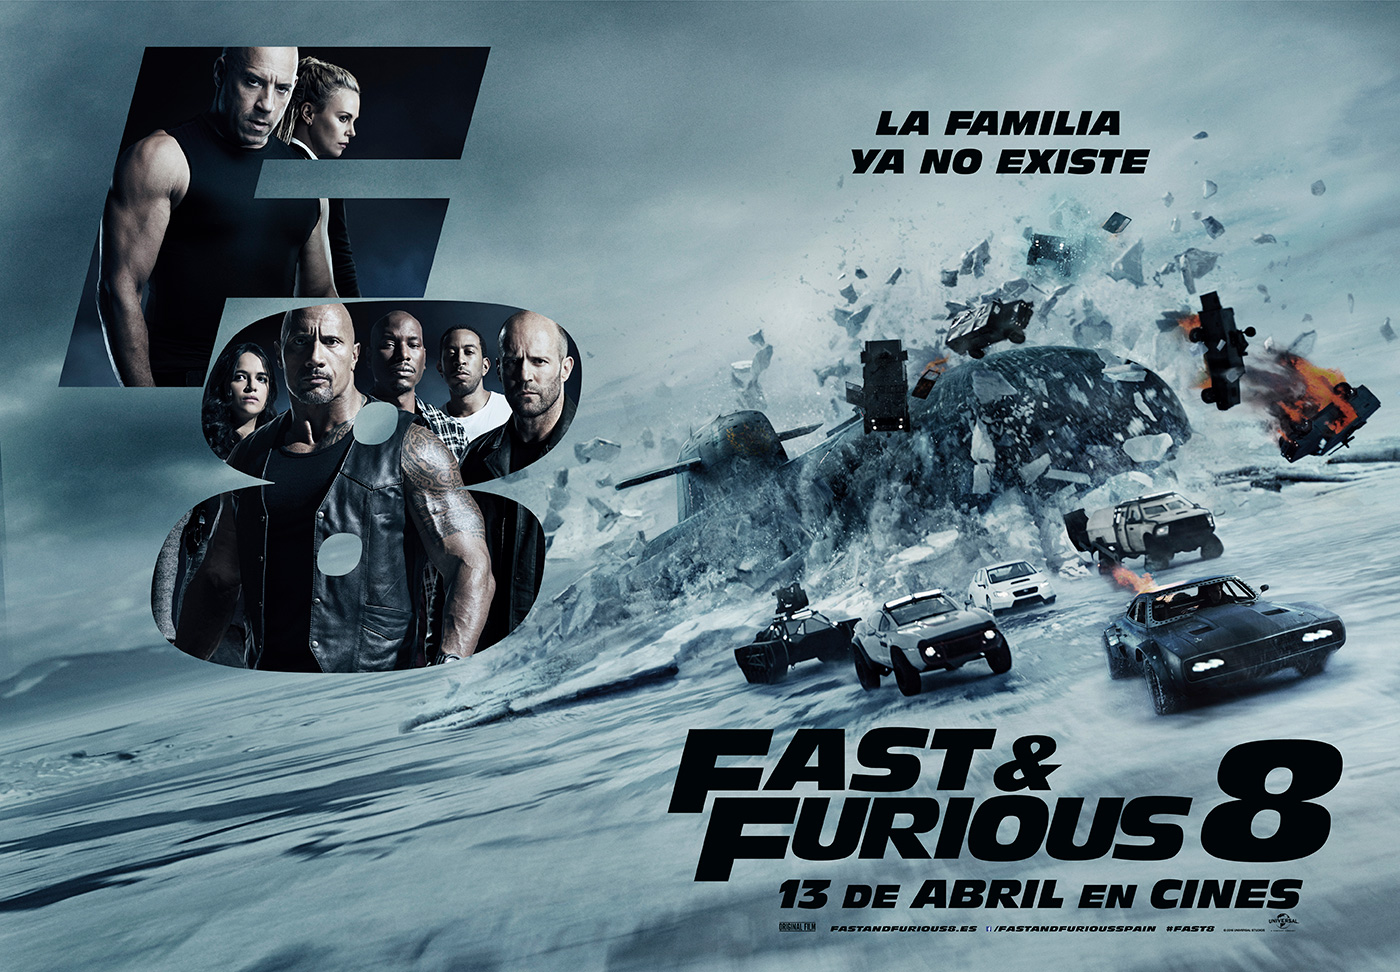 fast-and-furious-8-HD-movie | WATCH MOVIE TO HD TV ONLINE FREE MOVIES1400 x 972